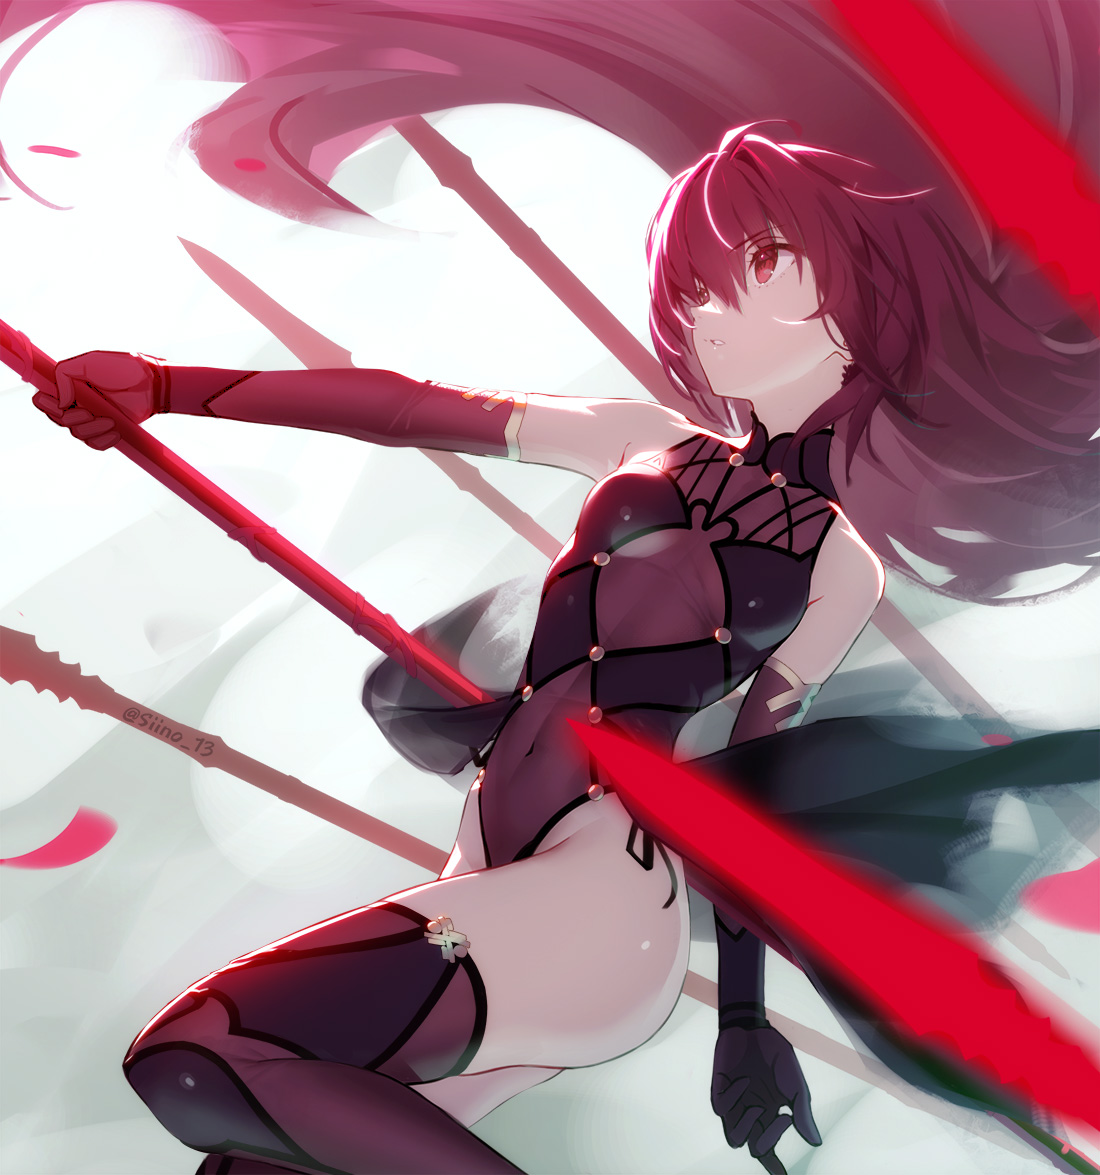 __scathach_fate_and_1_more_drawn_by_siino__81ec1ece38e0864ce6d2878ef0d1754e.jpg